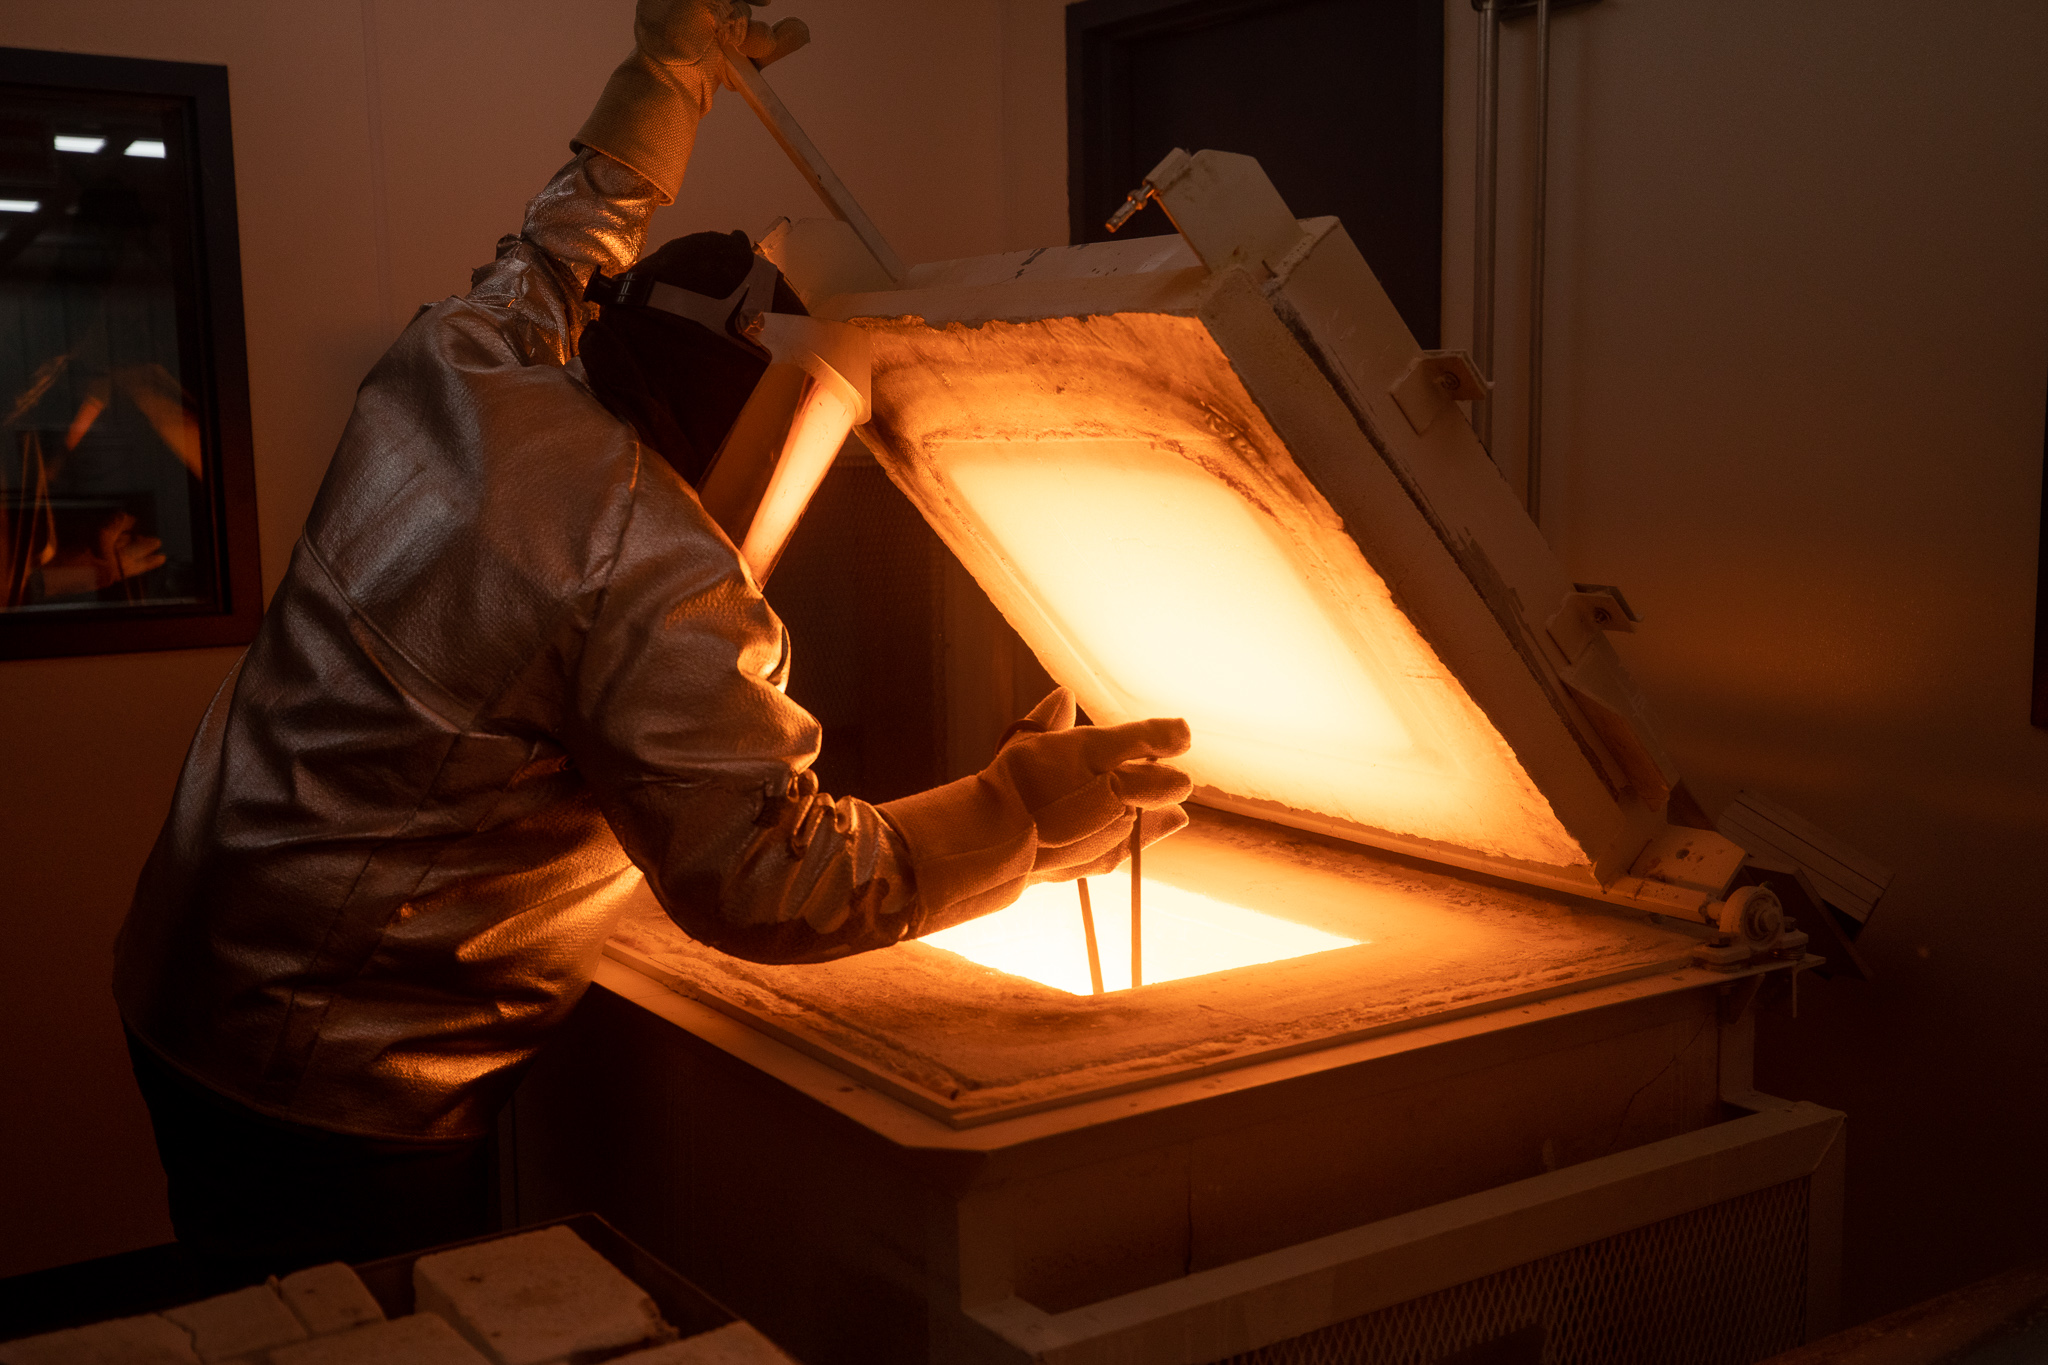 Worker in protective gear removing a crucible from a glass furnace